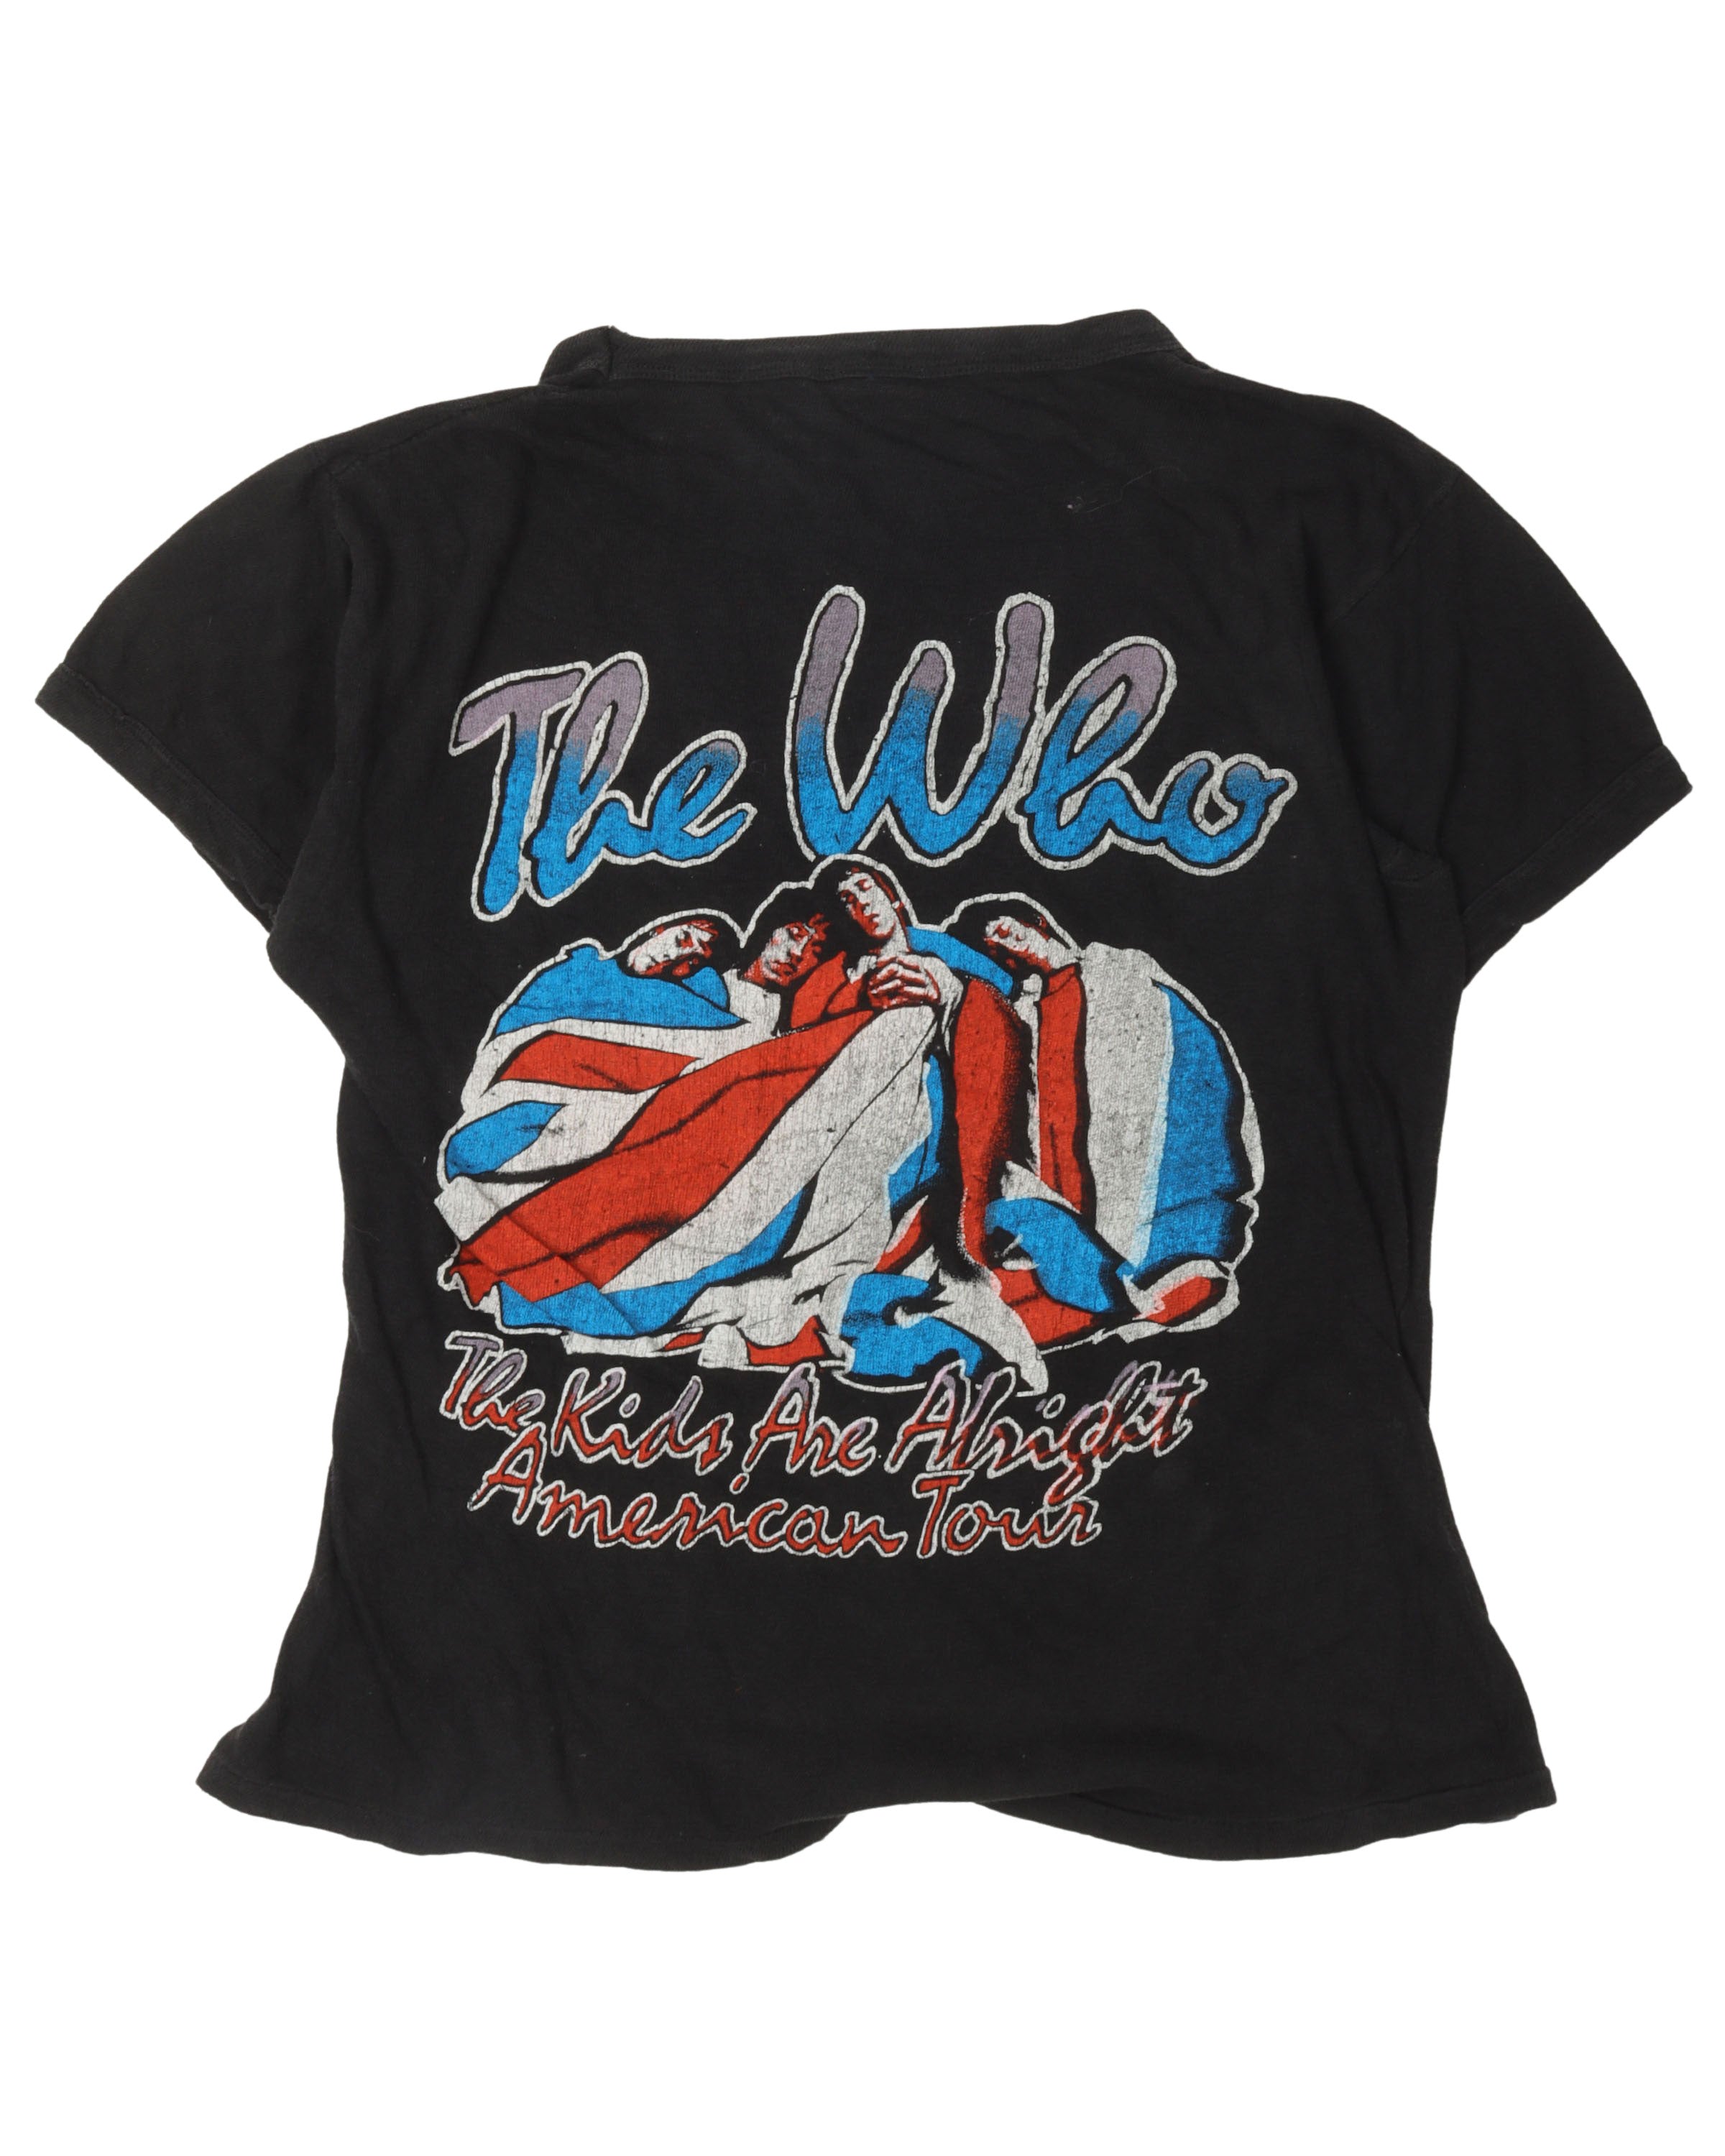 The Who "The Kids Are Alright" Tour T-Shirt